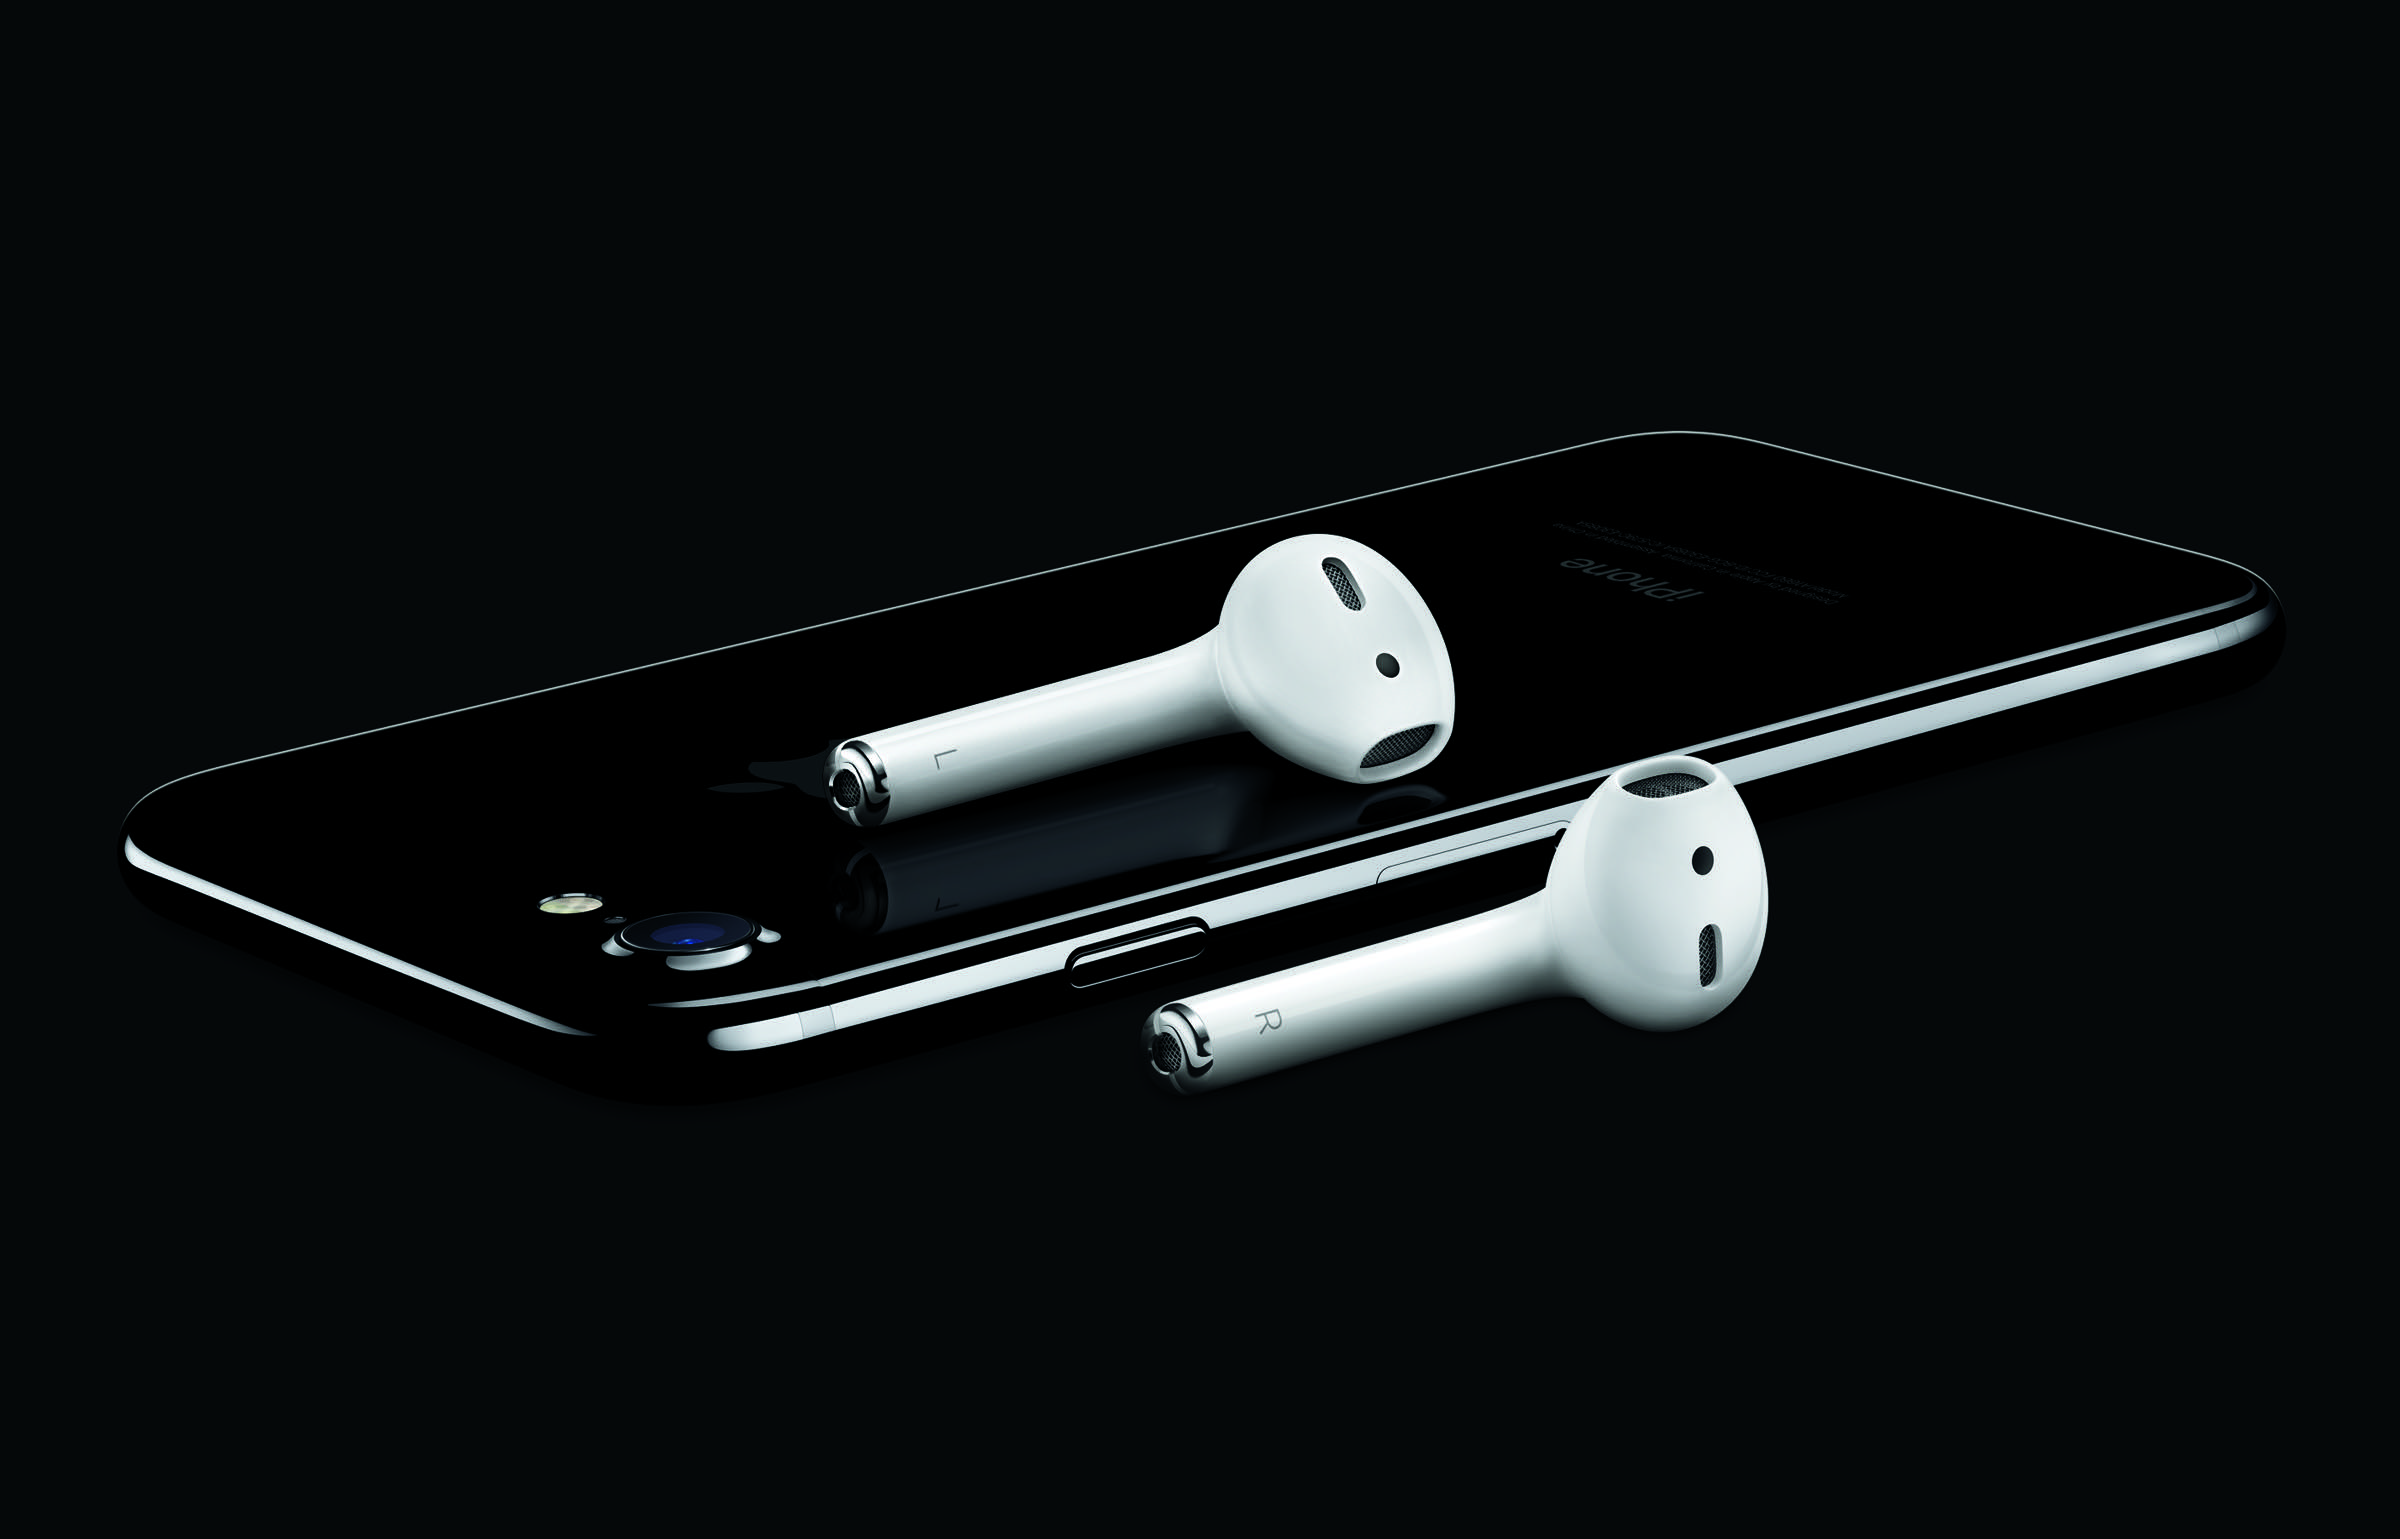 Apple iPhone 7 Air pods are Wireless Music Sensation